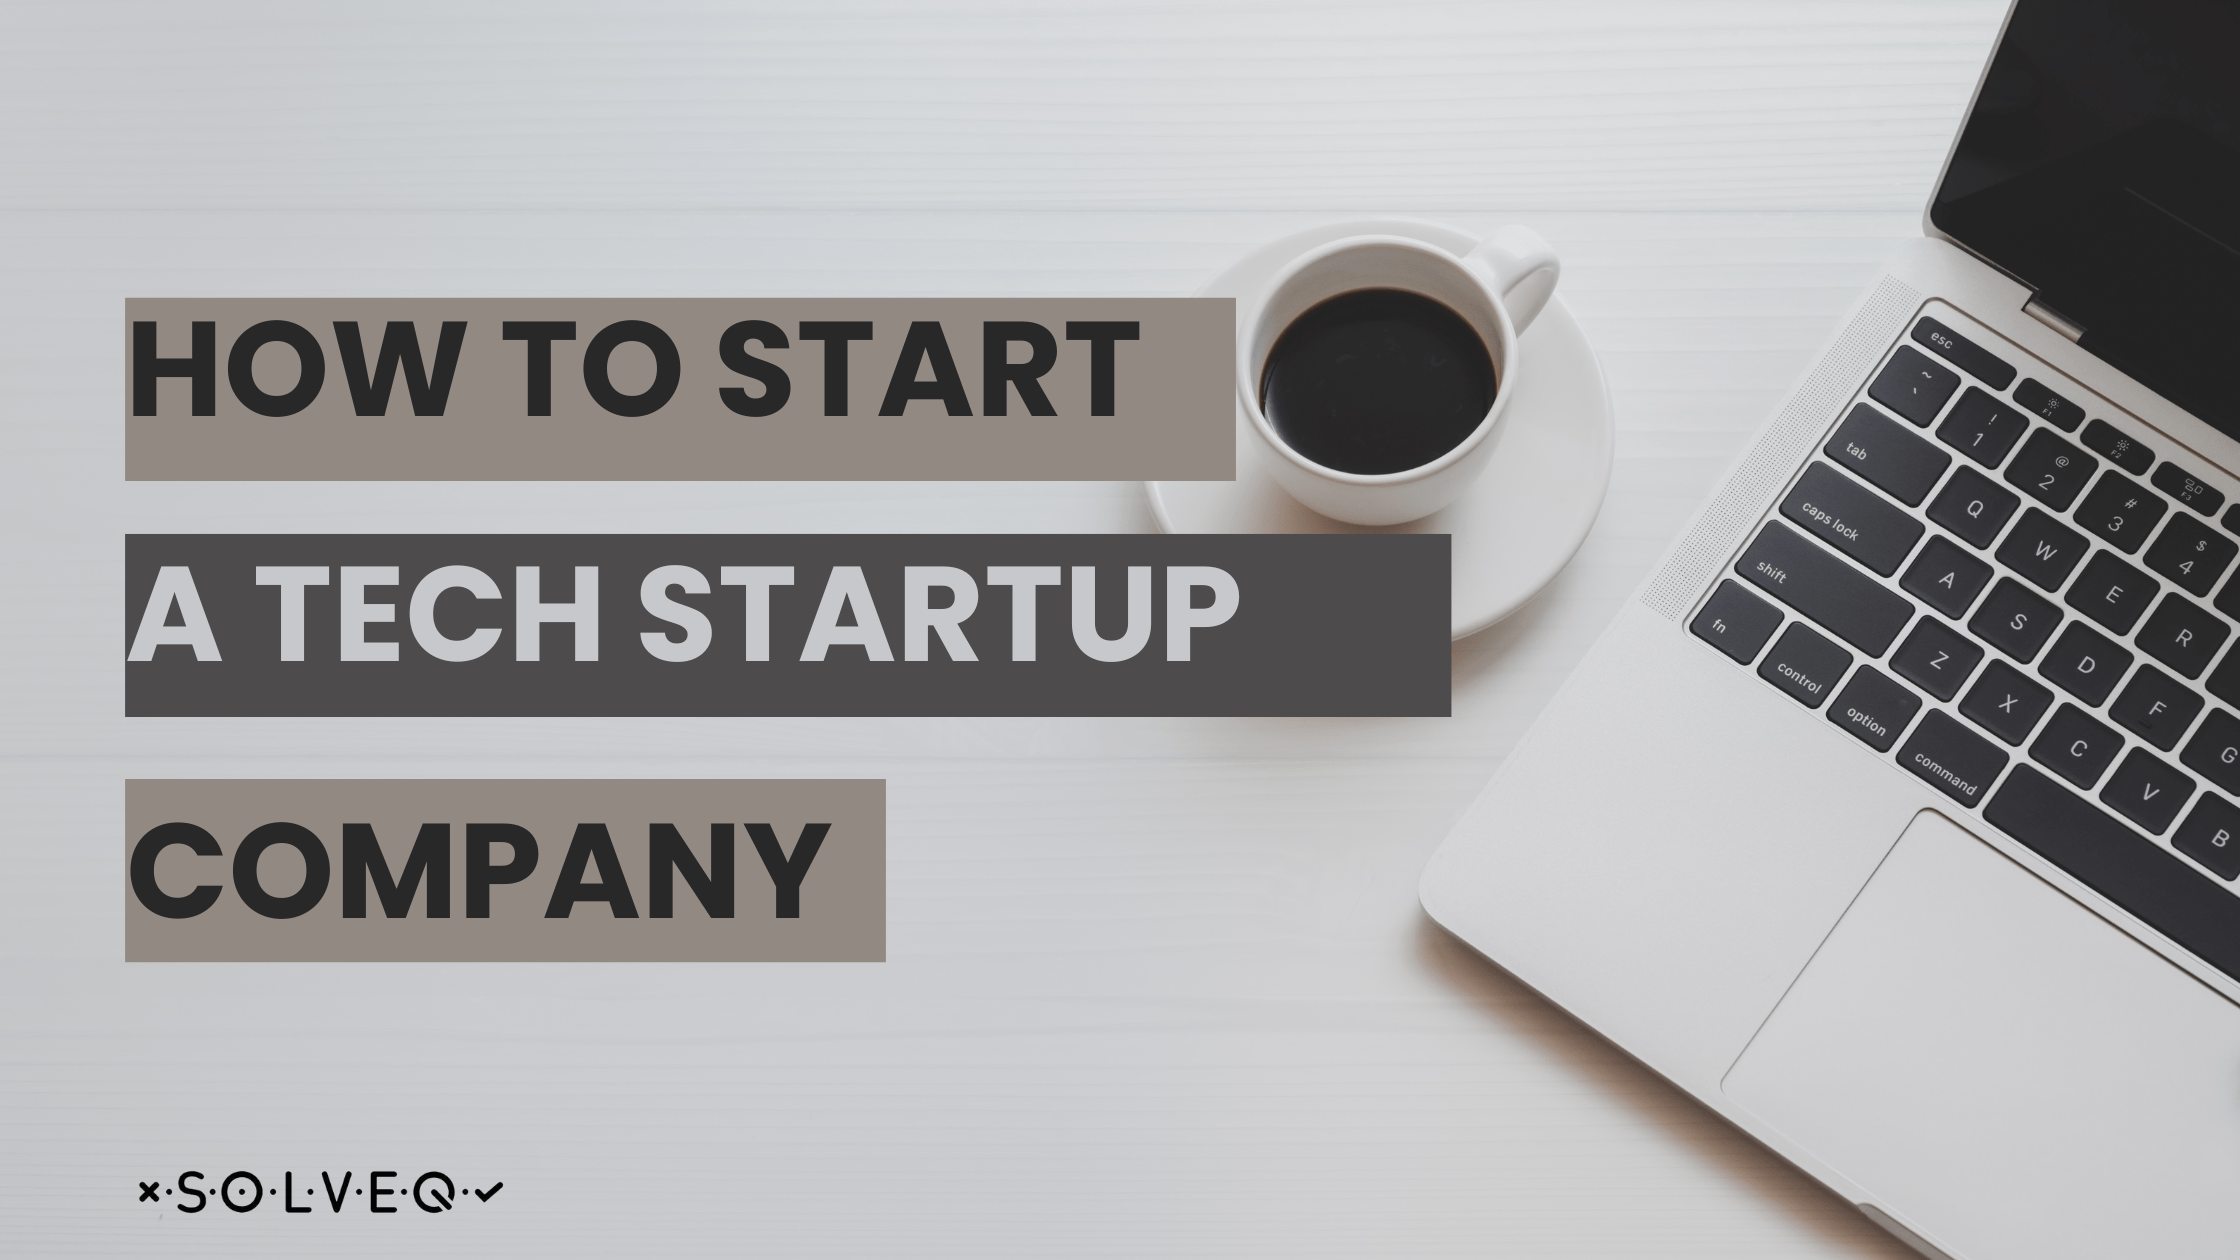 How to launch a tech startup company: Top 8 things to consider